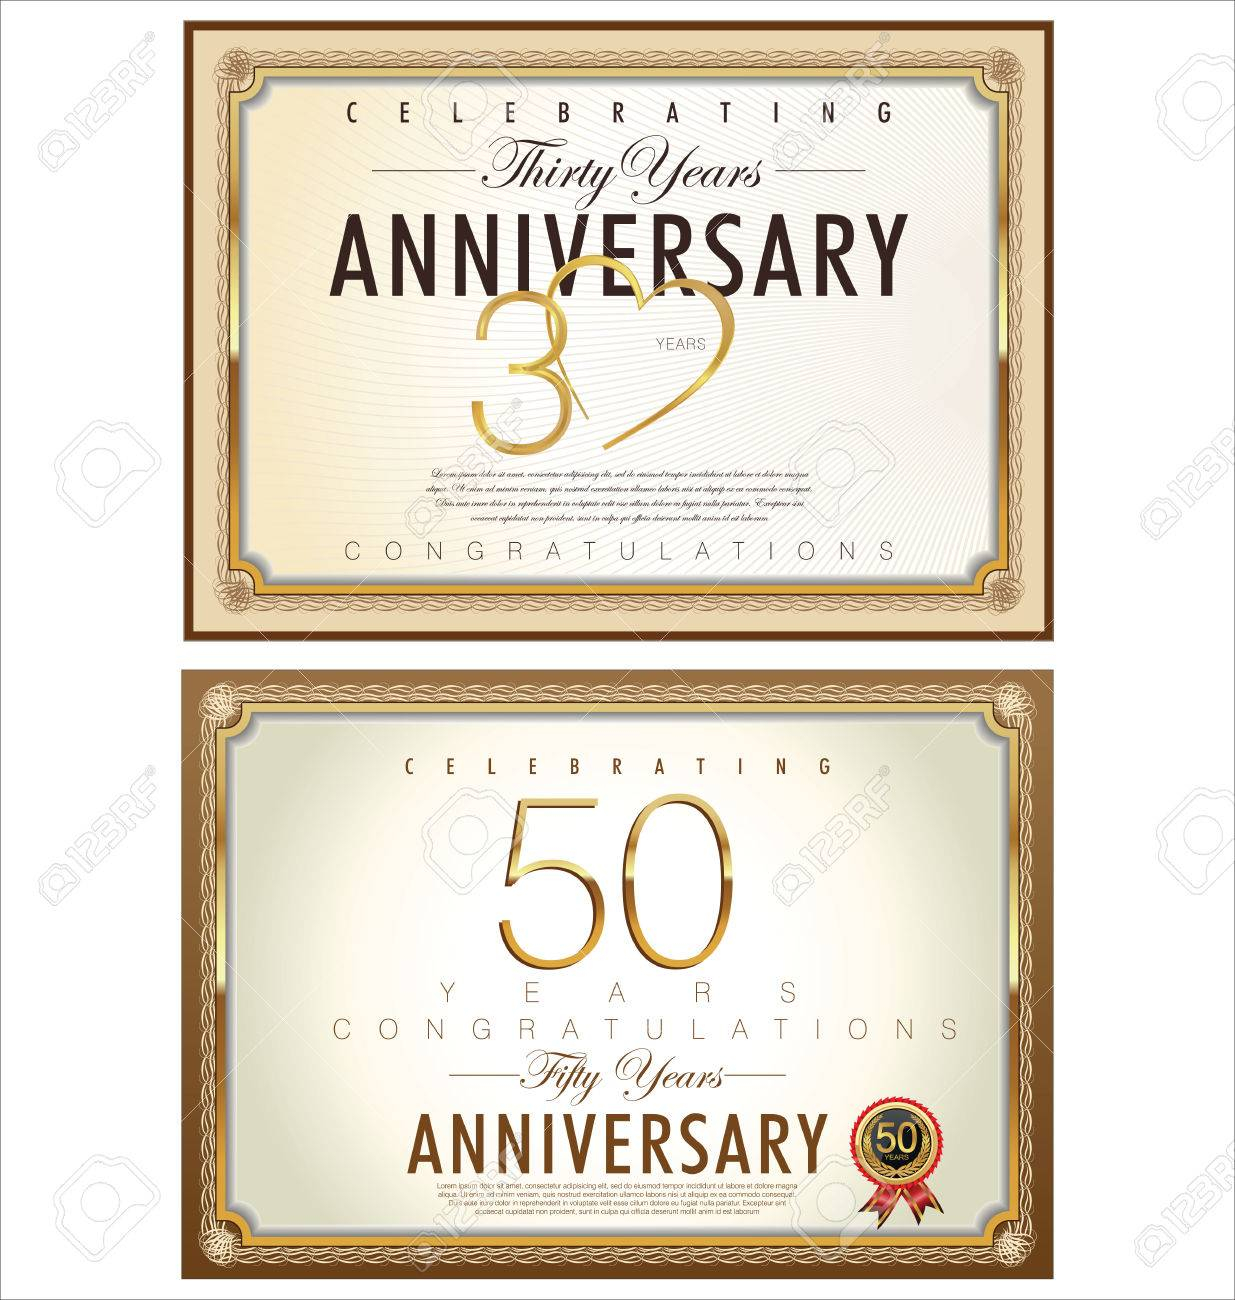 Anniversary Certificate Template Royalty Free SVG, Cliparts  With Regard To Anniversary Certificate Template Free